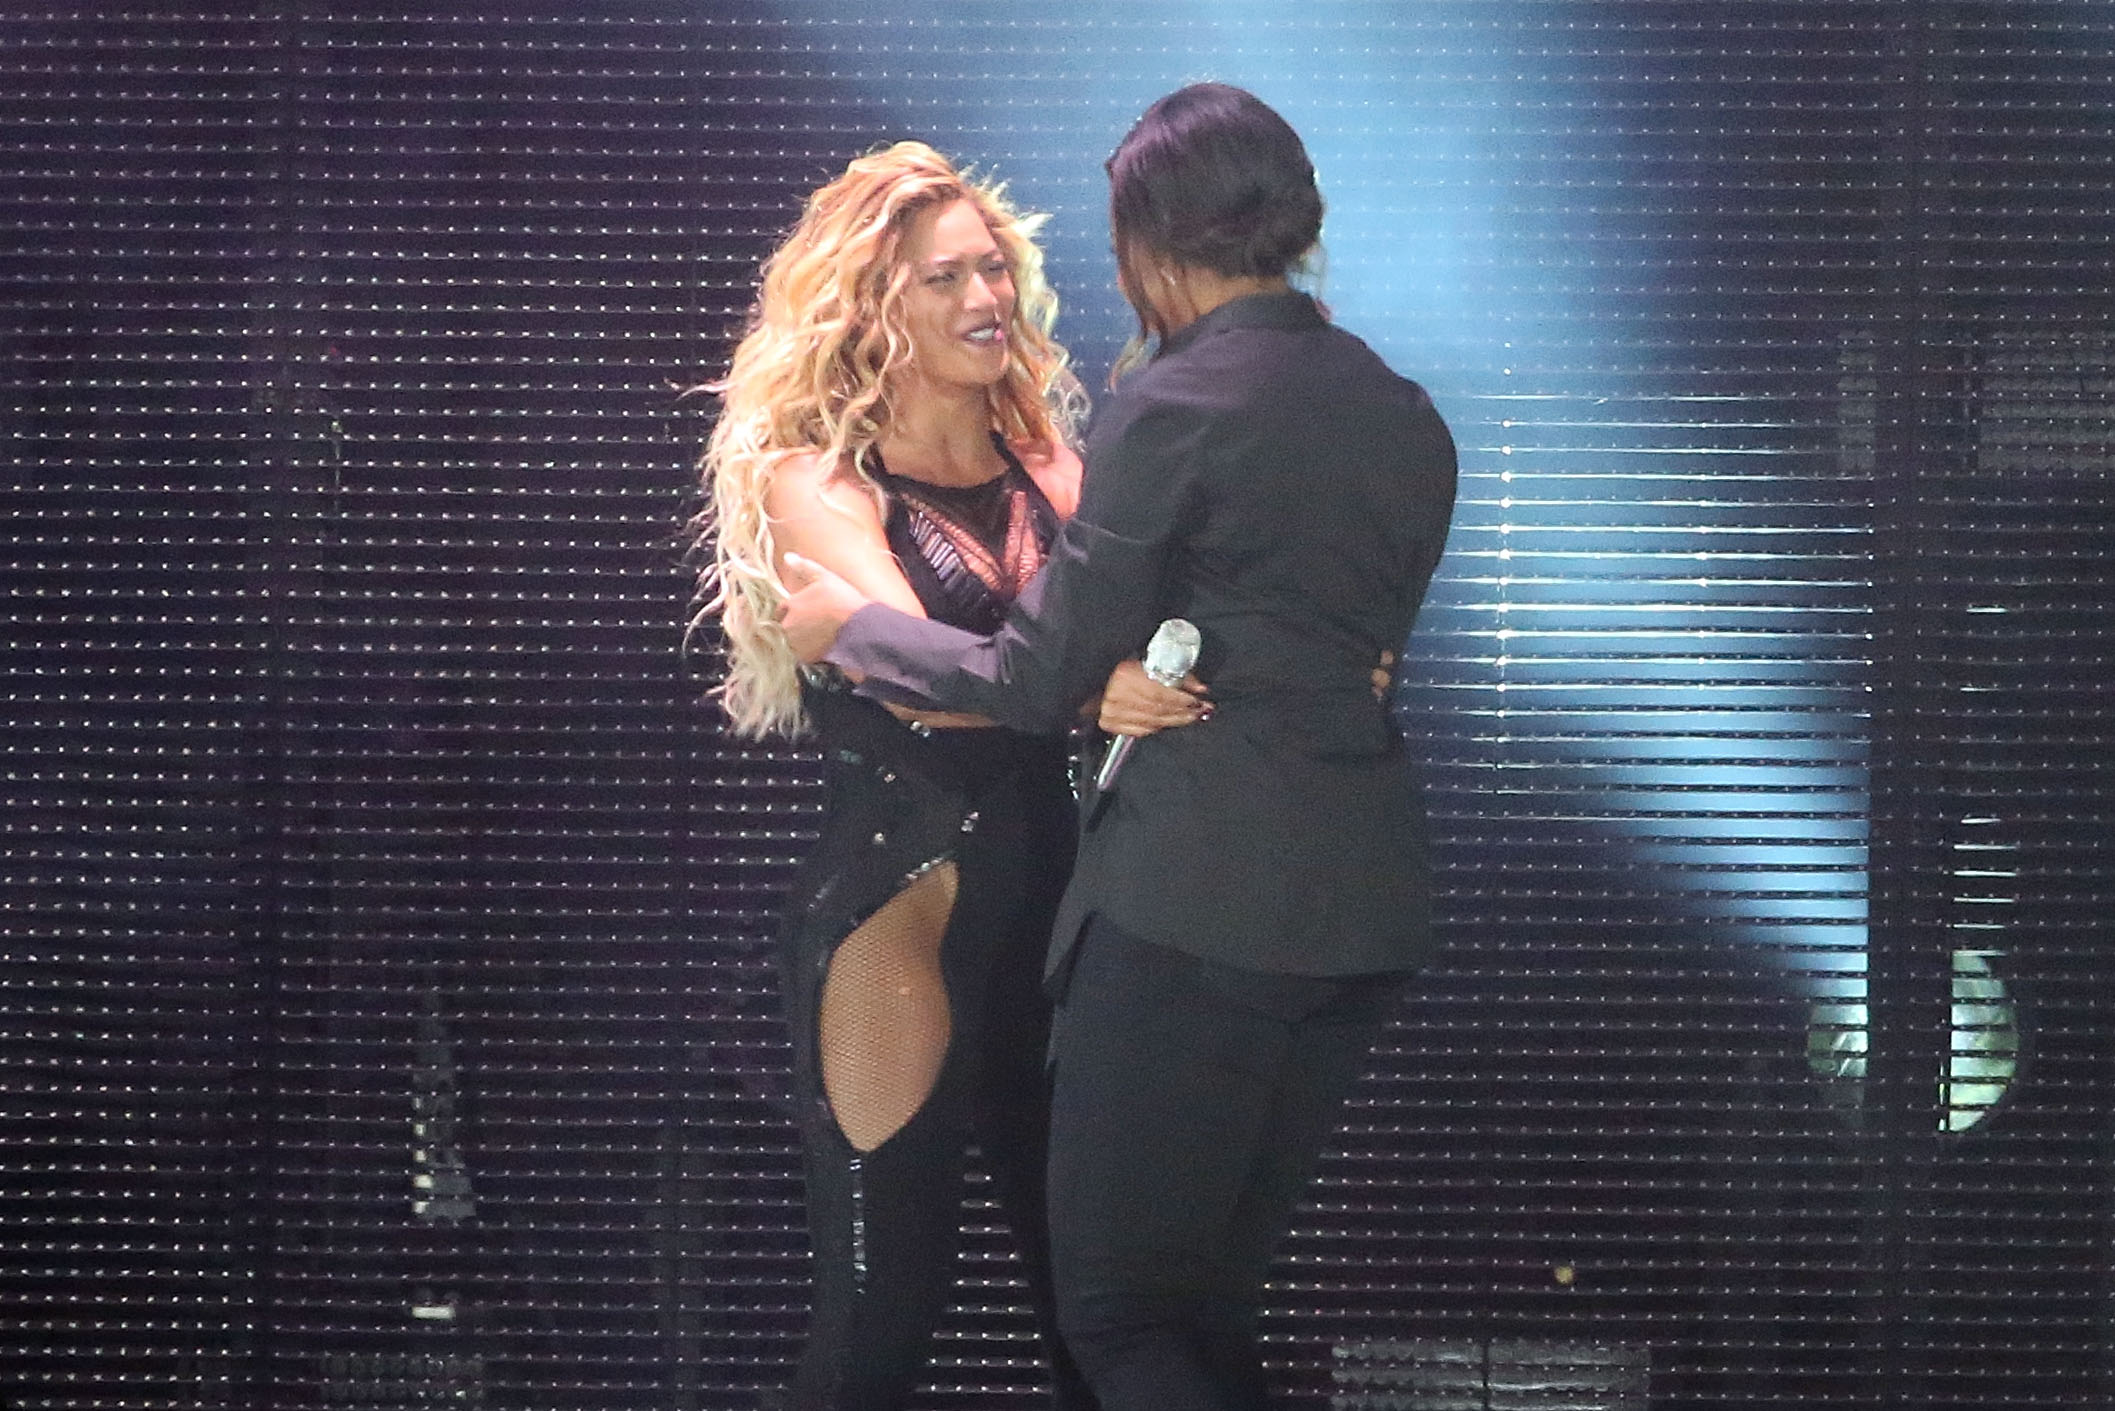 Beyonce and Michelle Obama hug during the 2015 Global Citizen Festival at Central Park on September 26, 2015 in New York City.